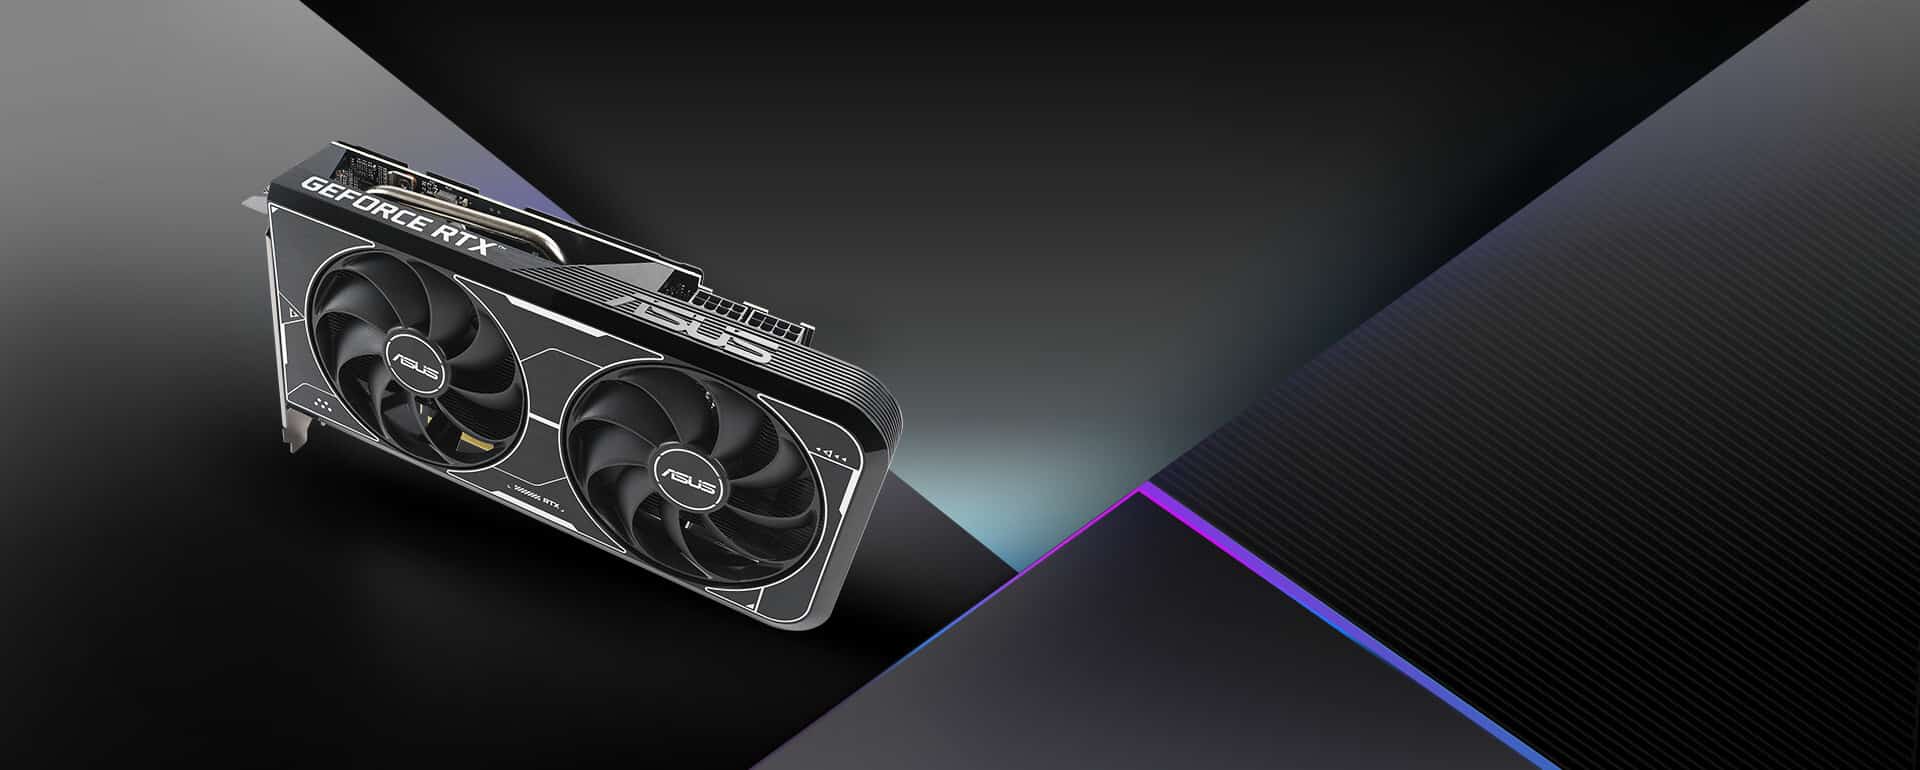 ASUS DUAL RTX 3060 Ti OC Edition Poster